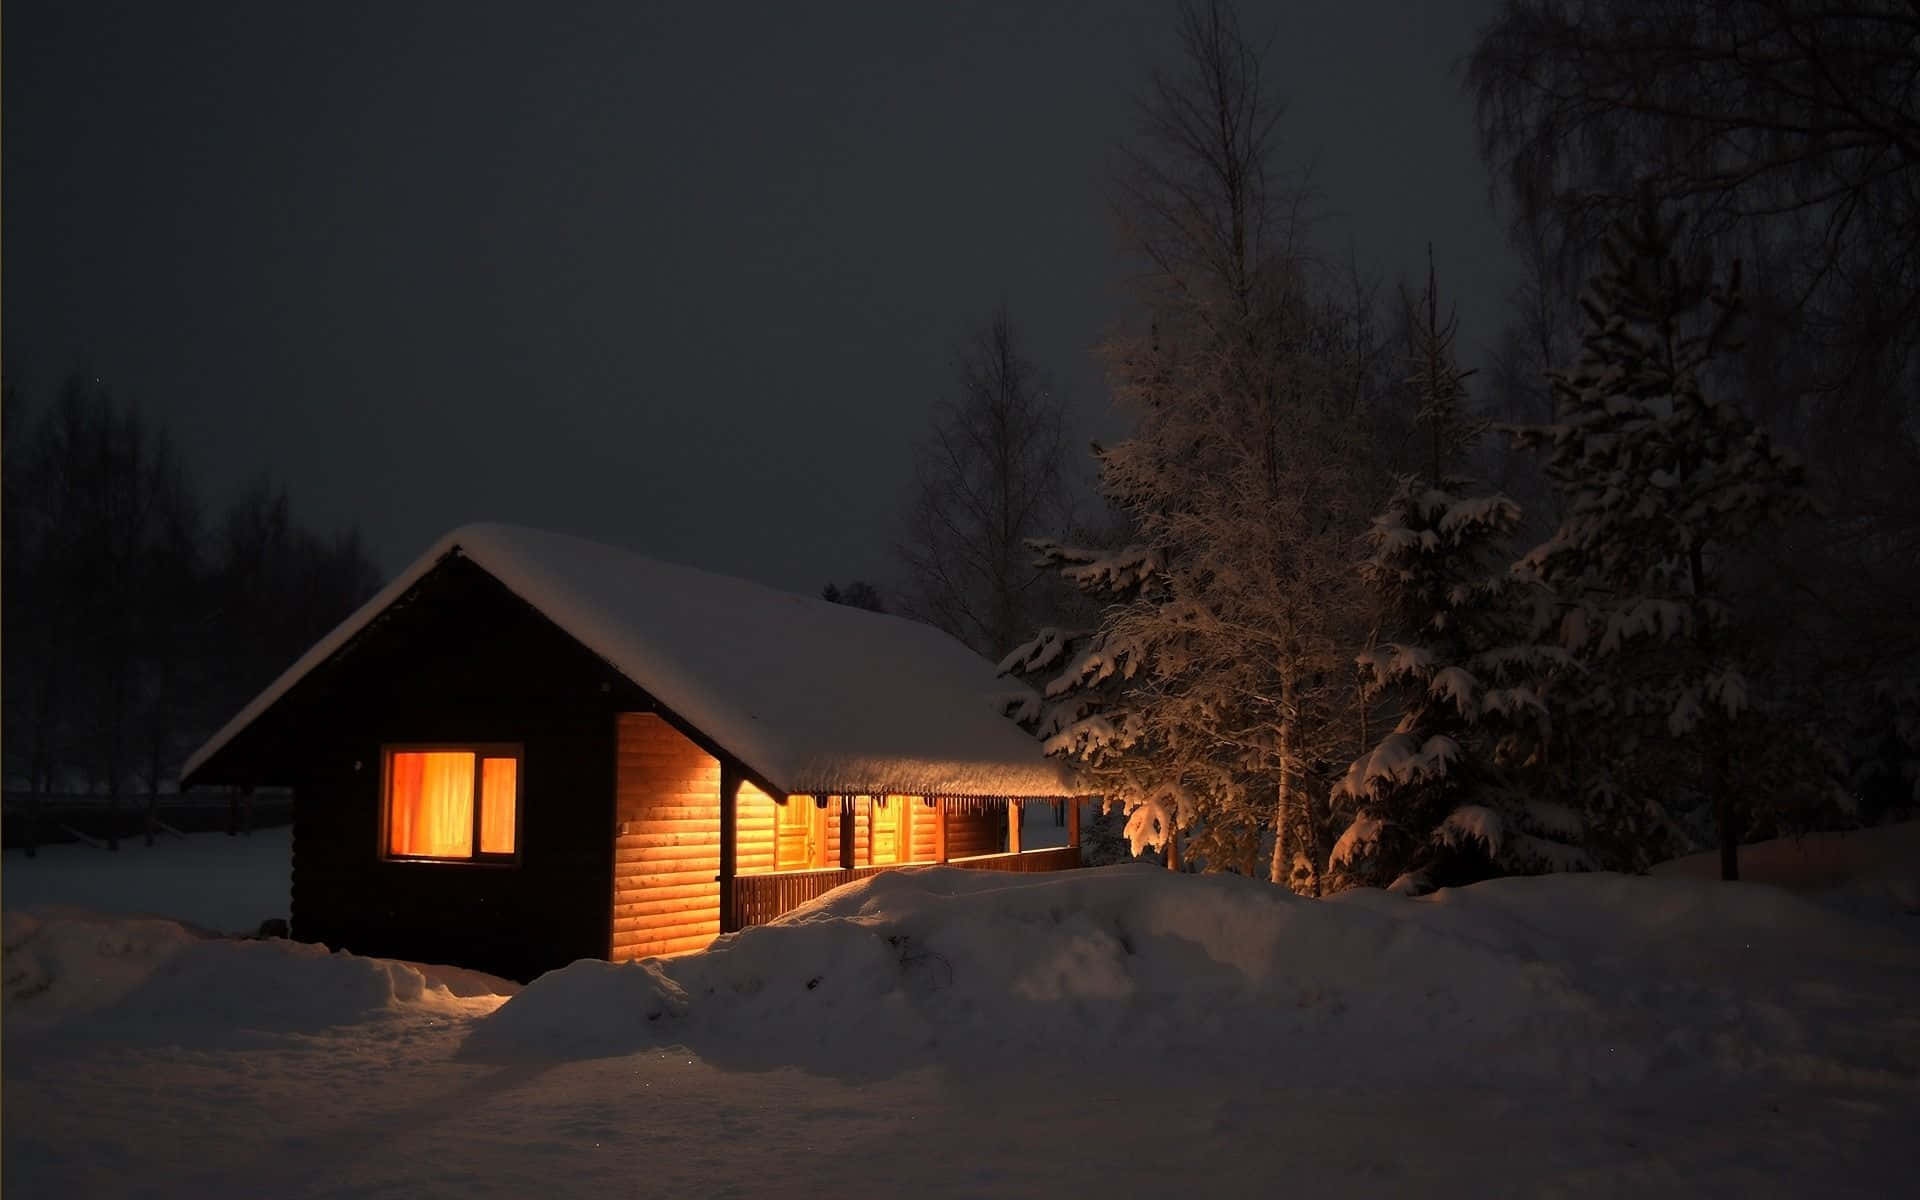 A Small Cabin Lit Up At Night In The Snow Wallpaper